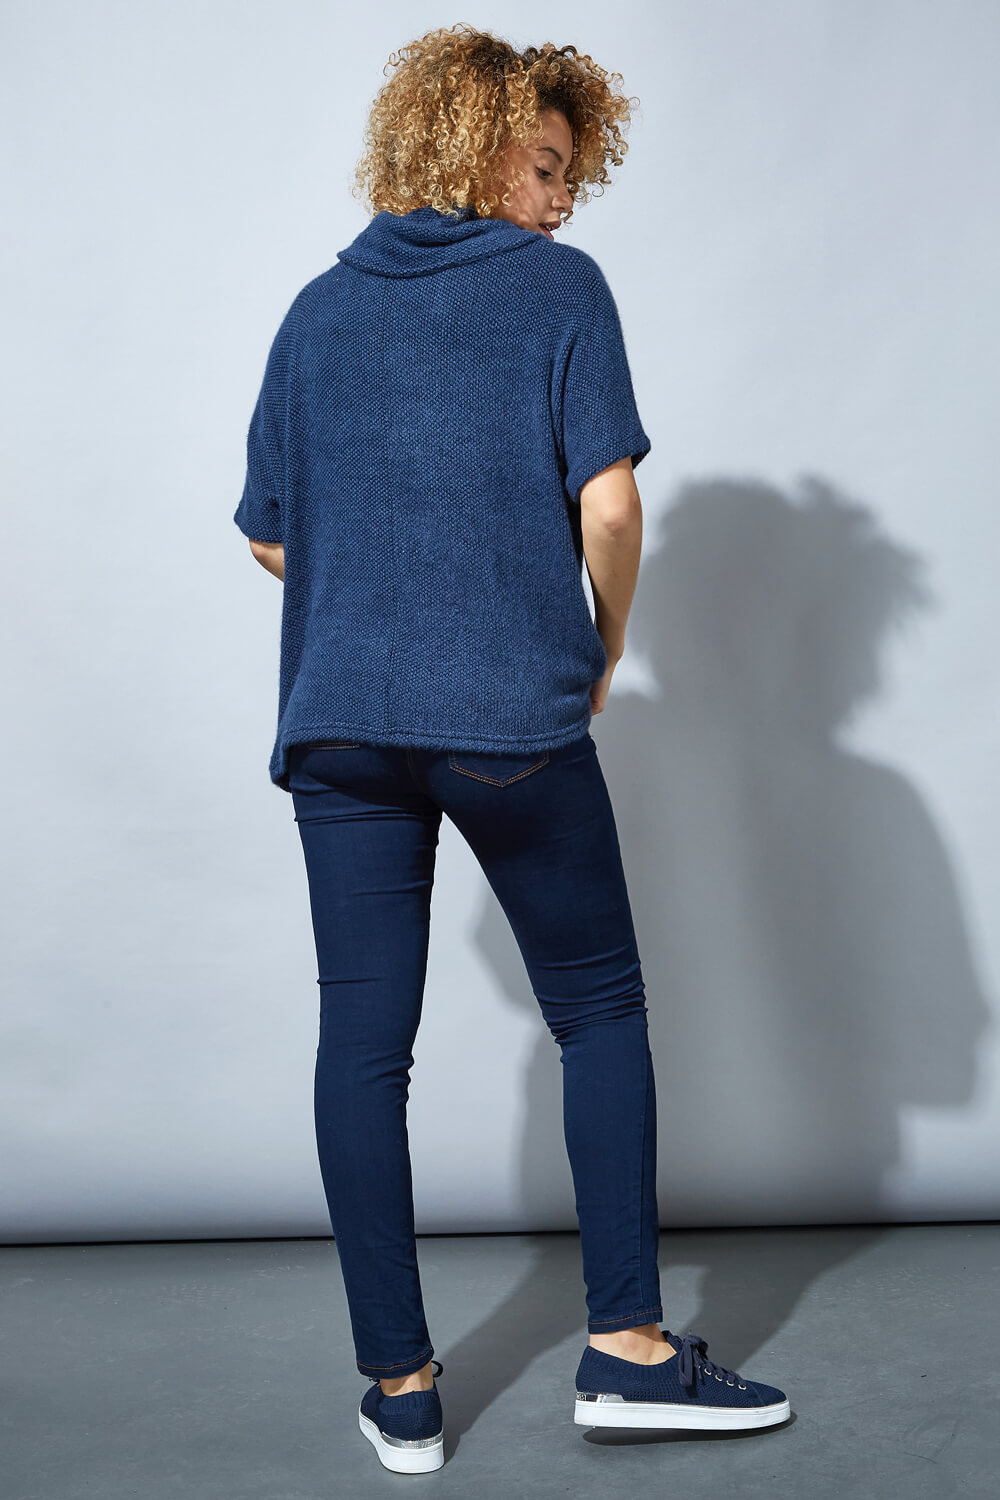 Blue Cowl Neck Textured Tunic Top, Image 3 of 4